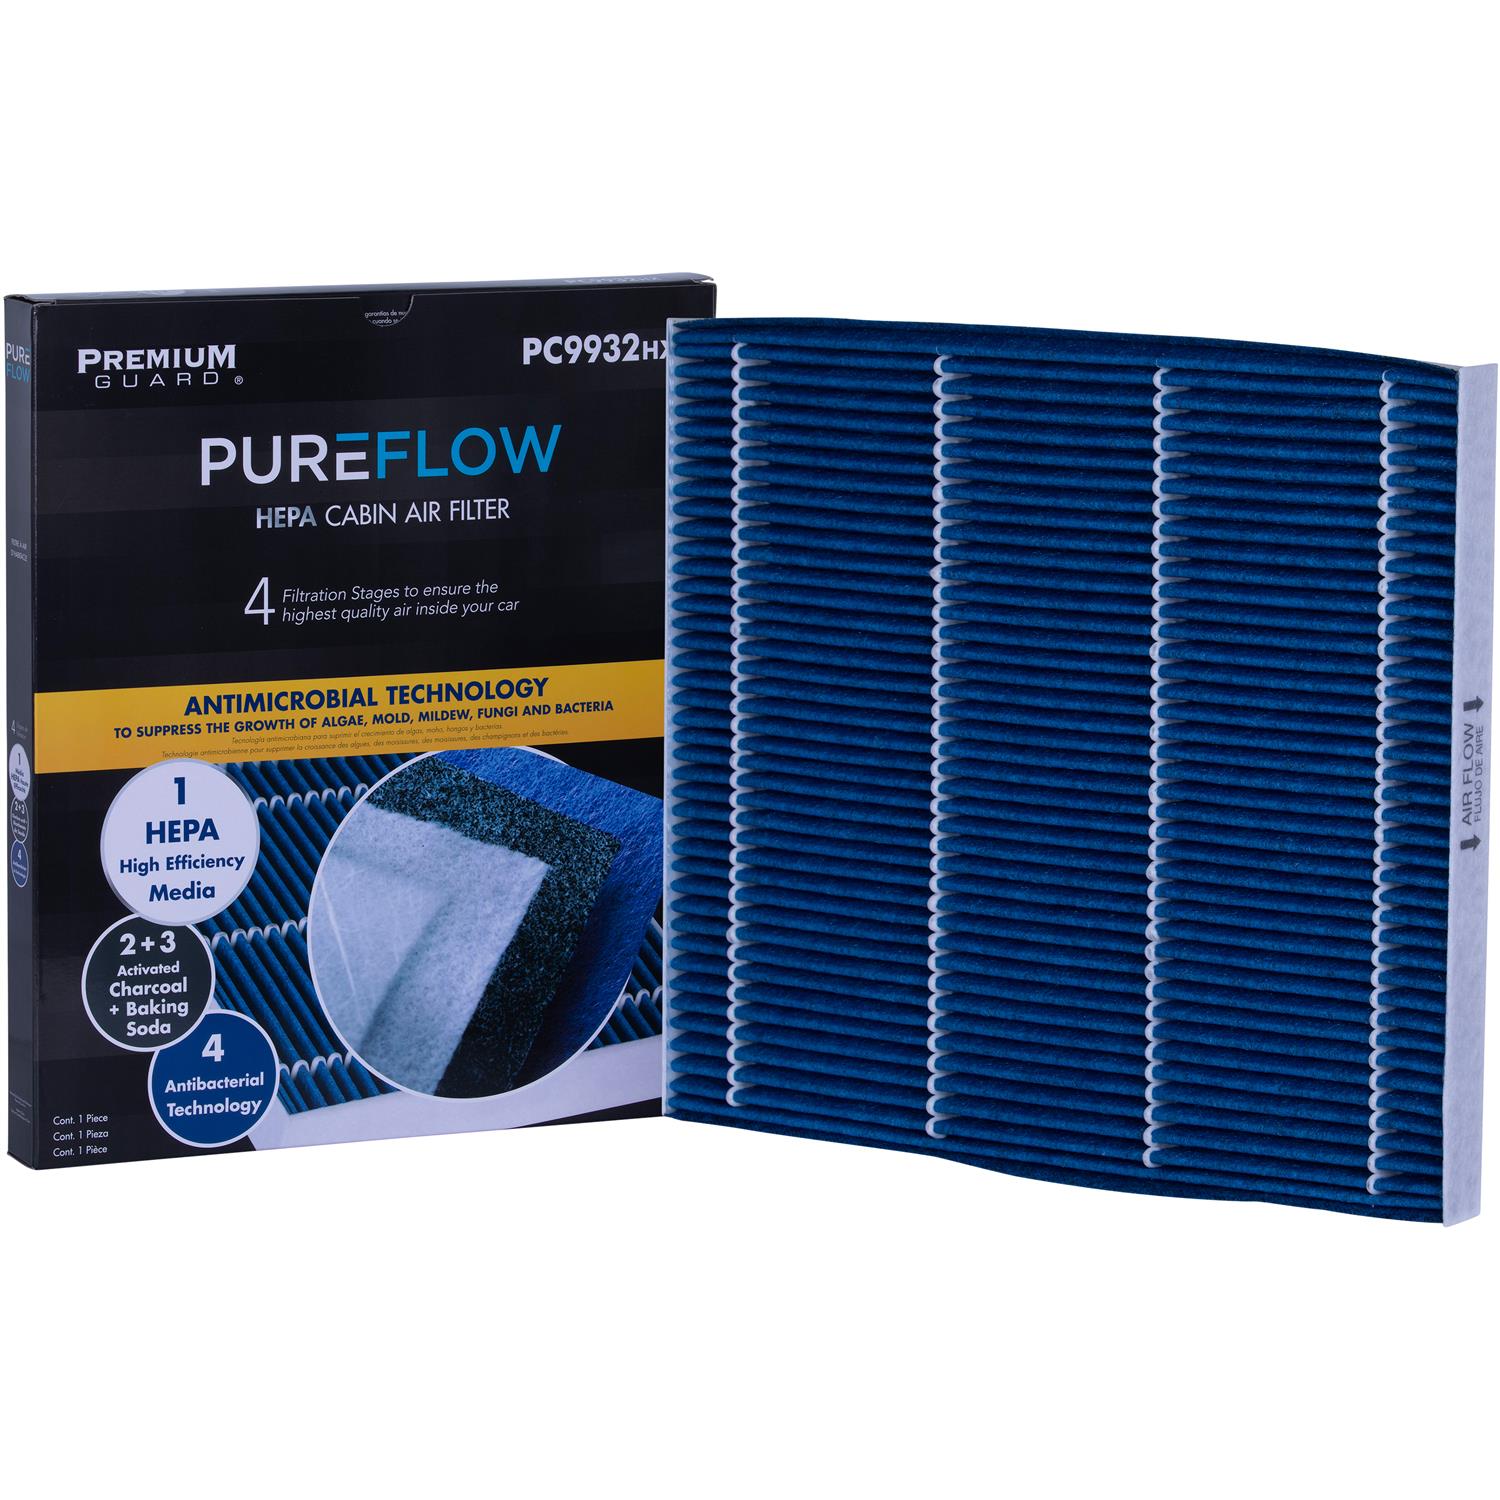 PUREFLOW 2015 Nissan Altima Cabin Air Filter with HEPA and Antibacterial Technology, PC9932HX